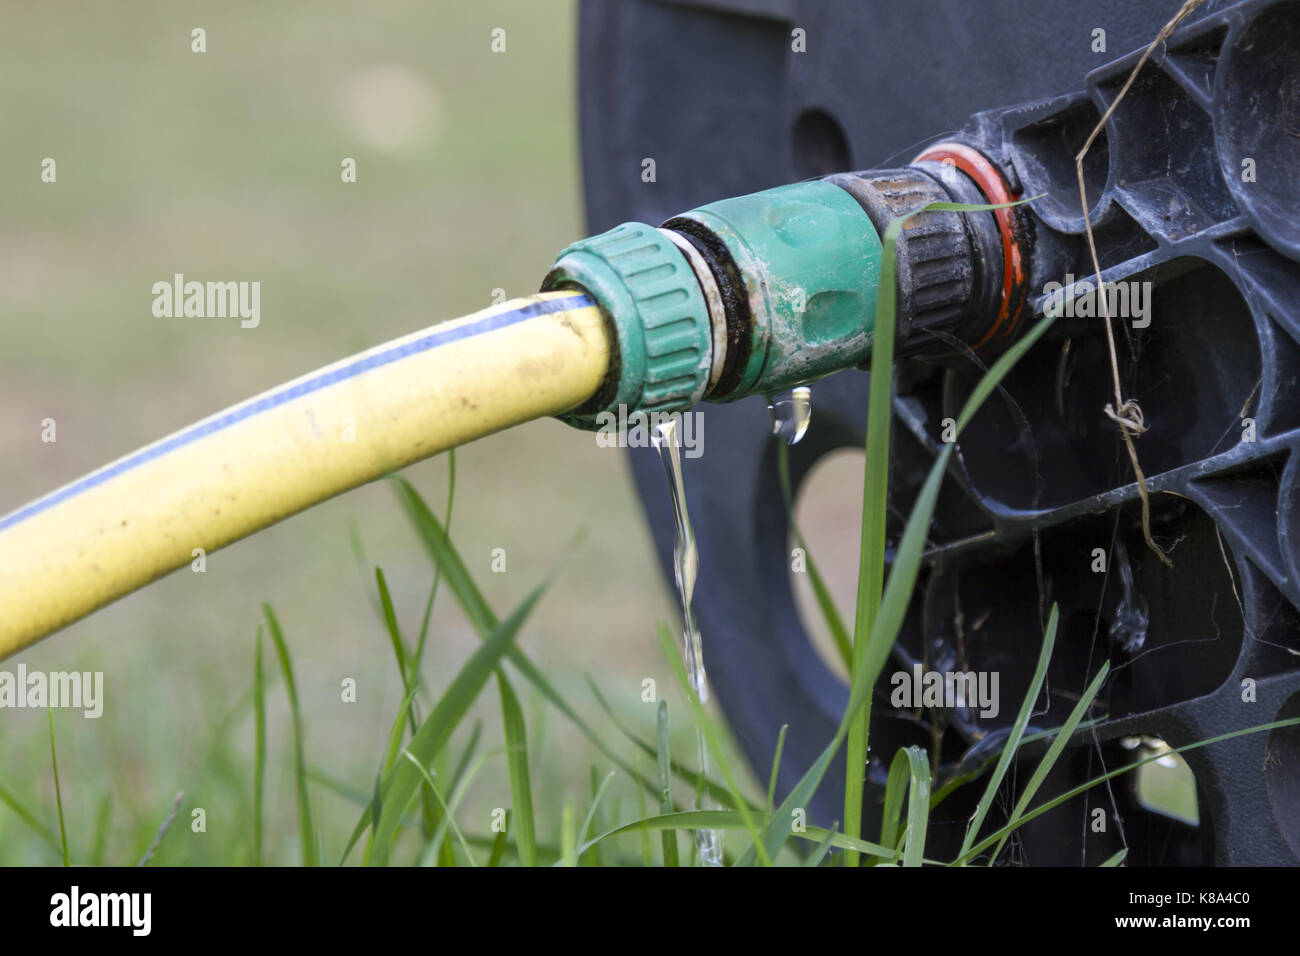 Wasting water in the garden, water leaking from a garden hose spigot. Plastic gardening hose with threaded brass fitting connected to water supply val Stock Photo